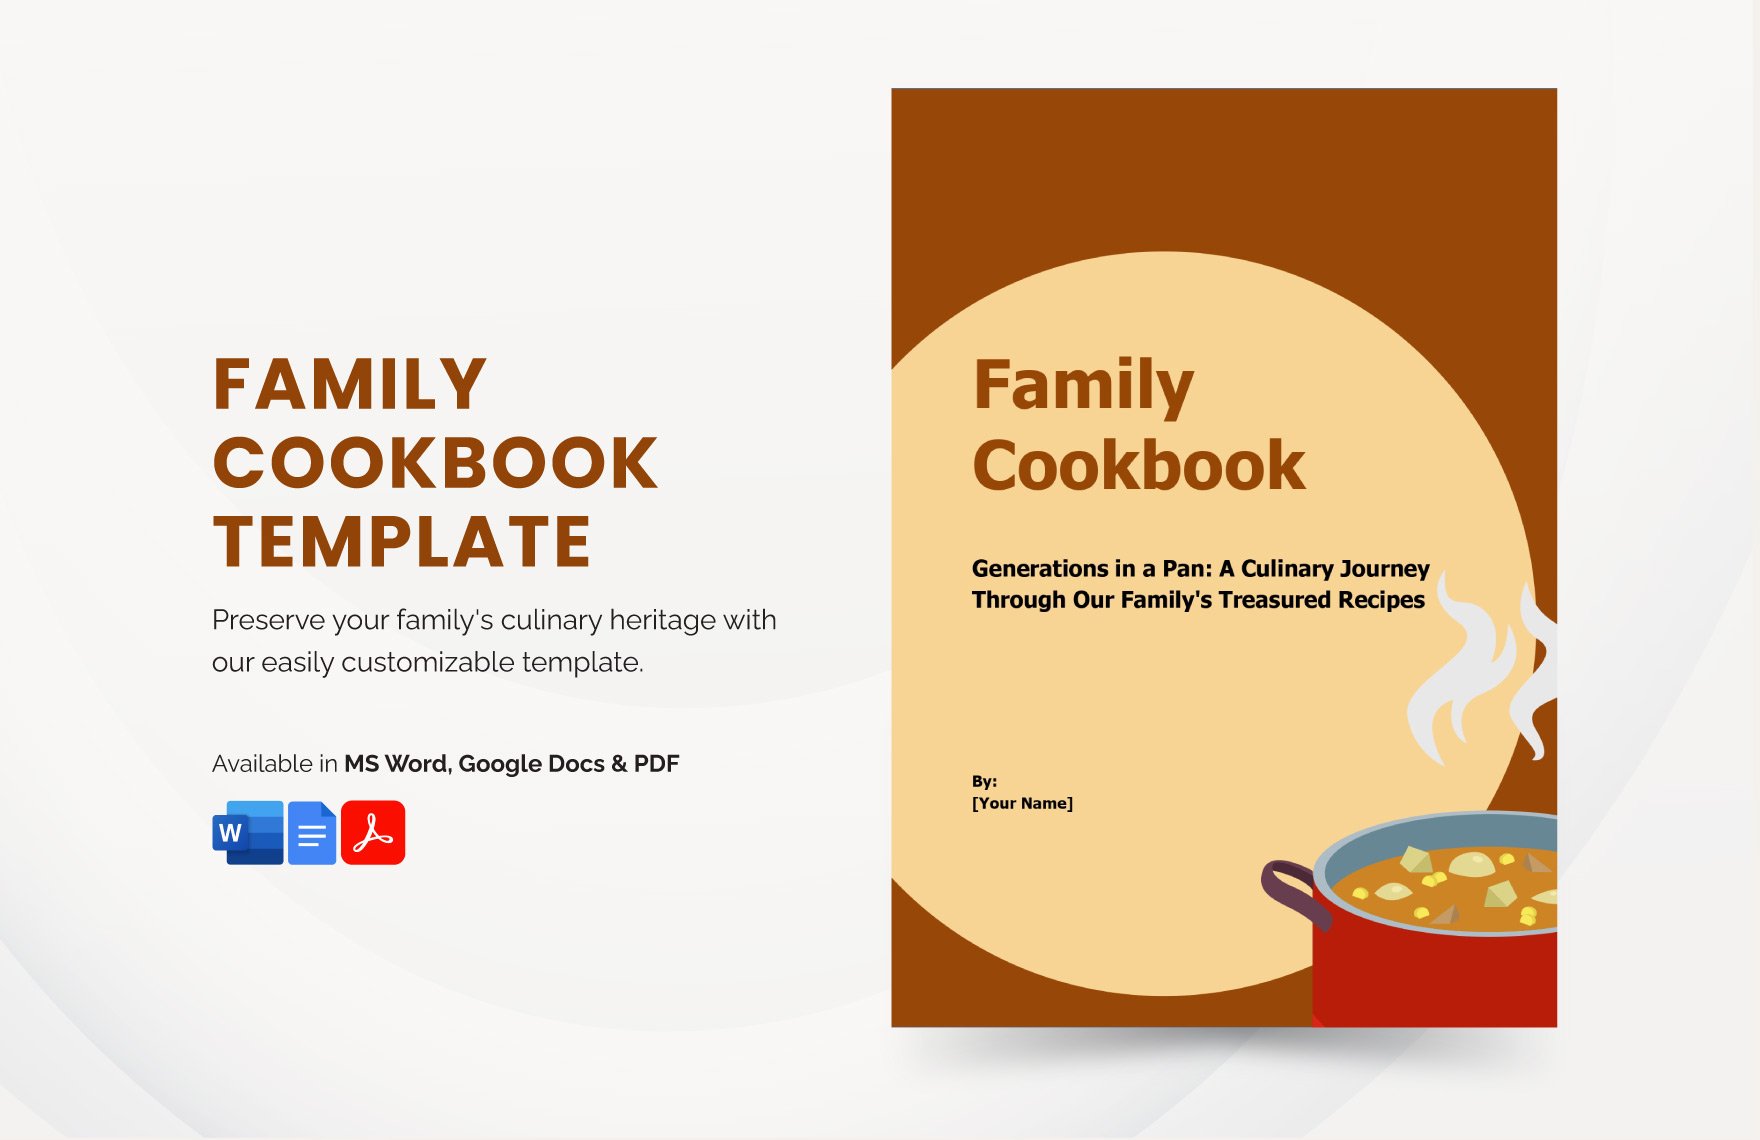 Family Cookbook Template in Word, Google Docs, PDF